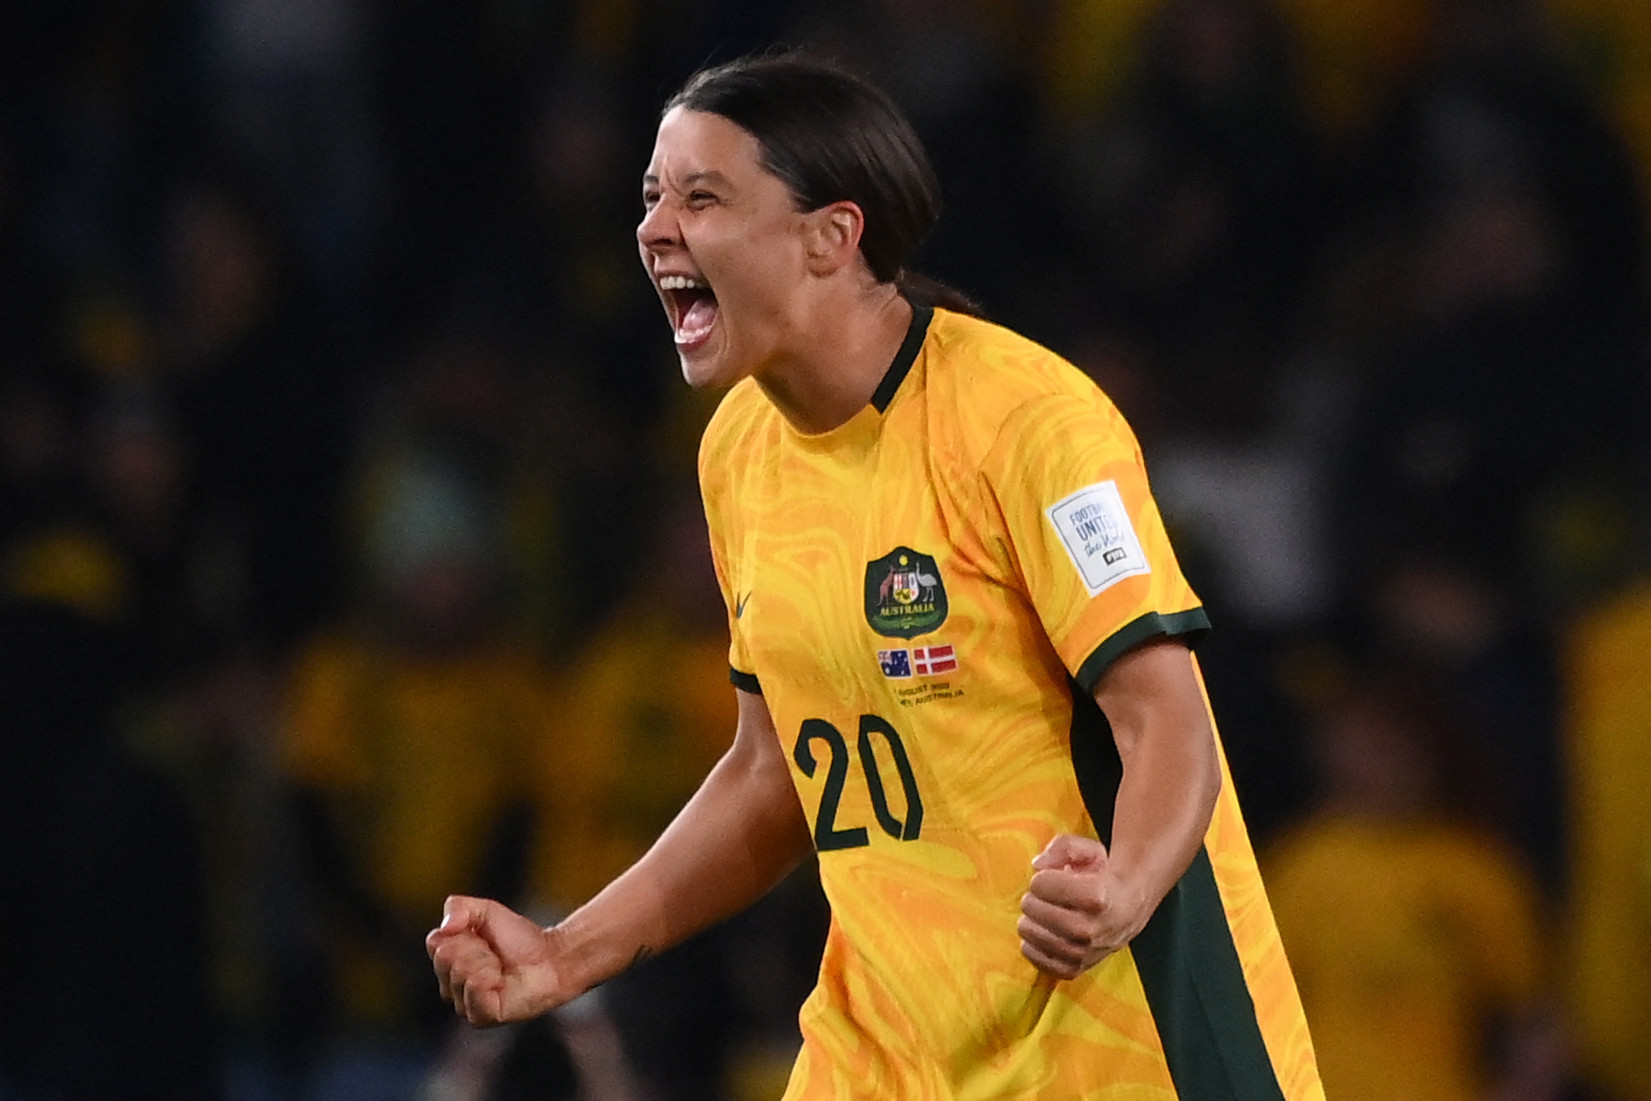 The successful return of Sam Kerr after injury was a morale boost for Australia ©Getty Images